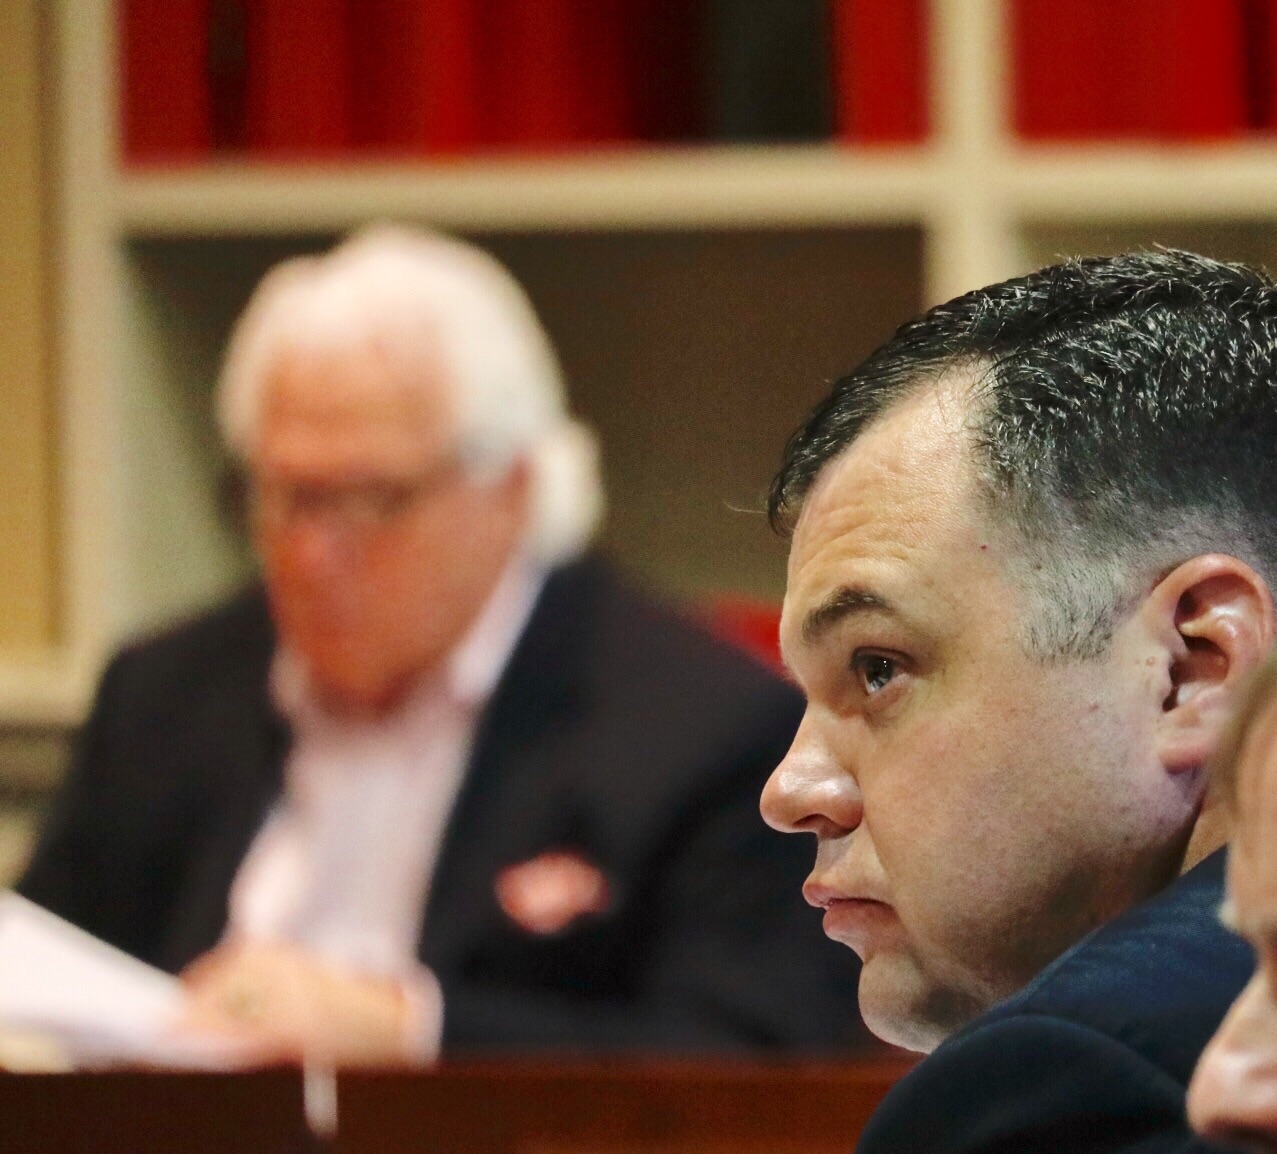 Sen. JB Jennings (foreground) and Senate President Thomas V. Mike Miller (background) at the Monday hearing for Schrader. (WTOP/Kate Ryan)